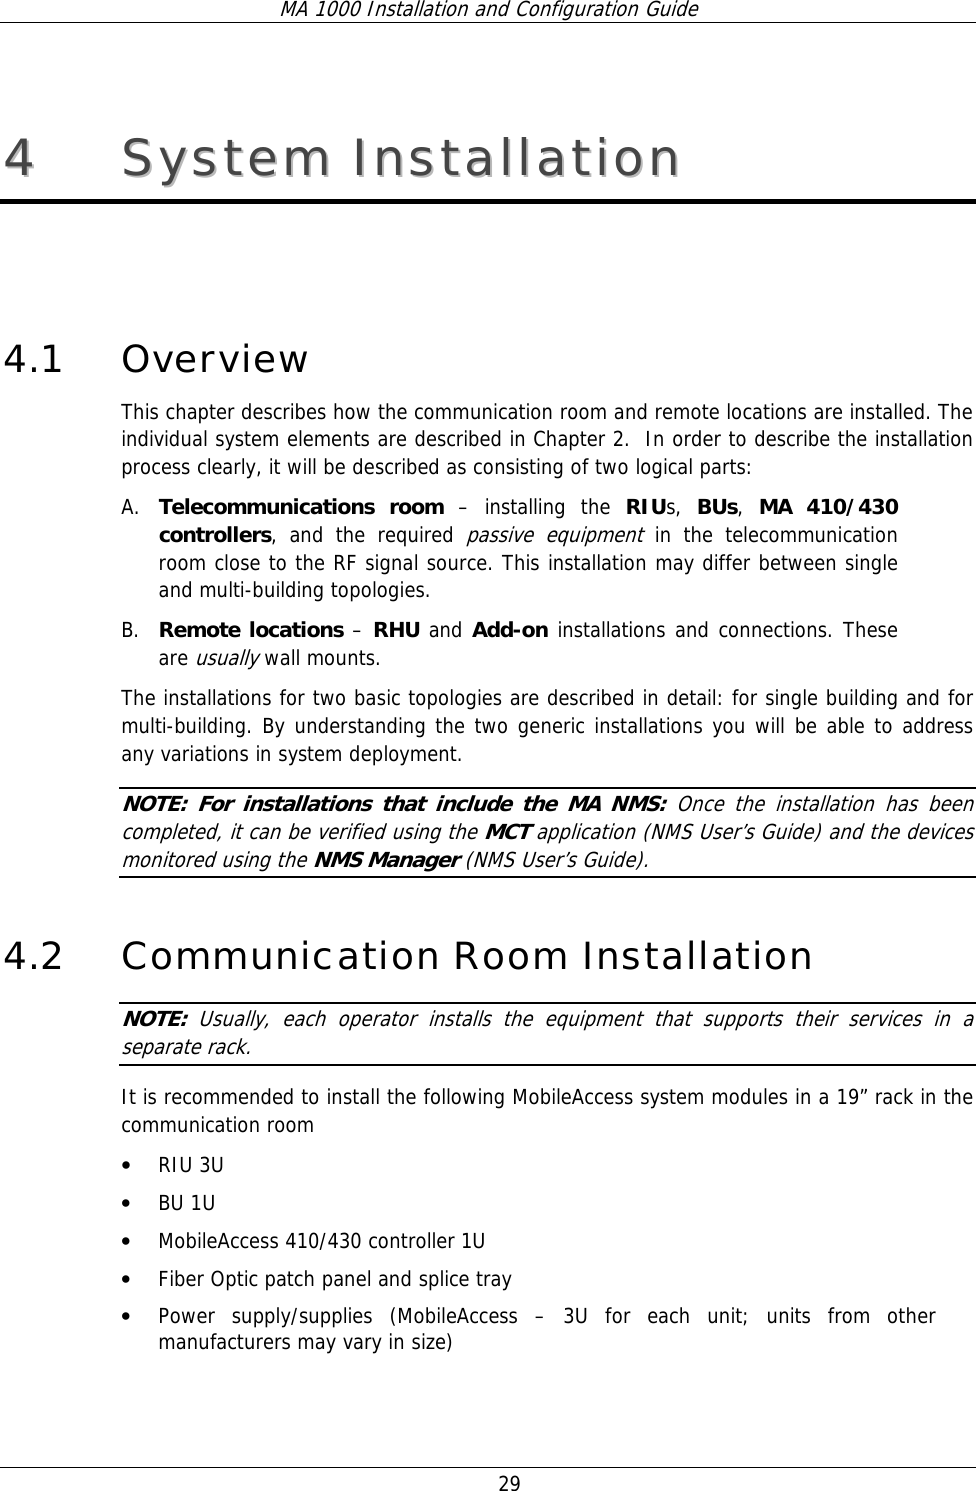 MA 1000 Installation and Configuration Guide  29 44  SSyysstteemm  IInnssttaallllaattiioonn   4.1 Overview This chapter describes how the communication room and remote locations are installed. The individual system elements are described in Chapter 2.  In order to describe the installation process clearly, it will be described as consisting of two logical parts:  A. Telecommunications room – installing the RIUs,  BUs,  MA 410/430 controllers, and the required passive equipment in the telecommunication room close to the RF signal source. This installation may differ between single  and multi-building topologies. B. Remote locations – RHU and Add-on installations and connections. These are usually wall mounts.  The installations for two basic topologies are described in detail: for single building and for multi-building. By understanding the two generic installations you will be able to address any variations in system deployment. NOTE: For installations that include the MA NMS: Once the installation has been completed, it can be verified using the MCT application (NMS User’s Guide) and the devices monitored using the NMS Manager (NMS User’s Guide). 4.2 Communication Room Installation NOTE:  Usually, each operator installs the equipment that supports their services in a separate rack. It is recommended to install the following MobileAccess system modules in a 19” rack in the communication room • RIU 3U • BU 1U  • MobileAccess 410/430 controller 1U • Fiber Optic patch panel and splice tray • Power supply/supplies (MobileAccess – 3U for each unit; units from other manufacturers may vary in size) 